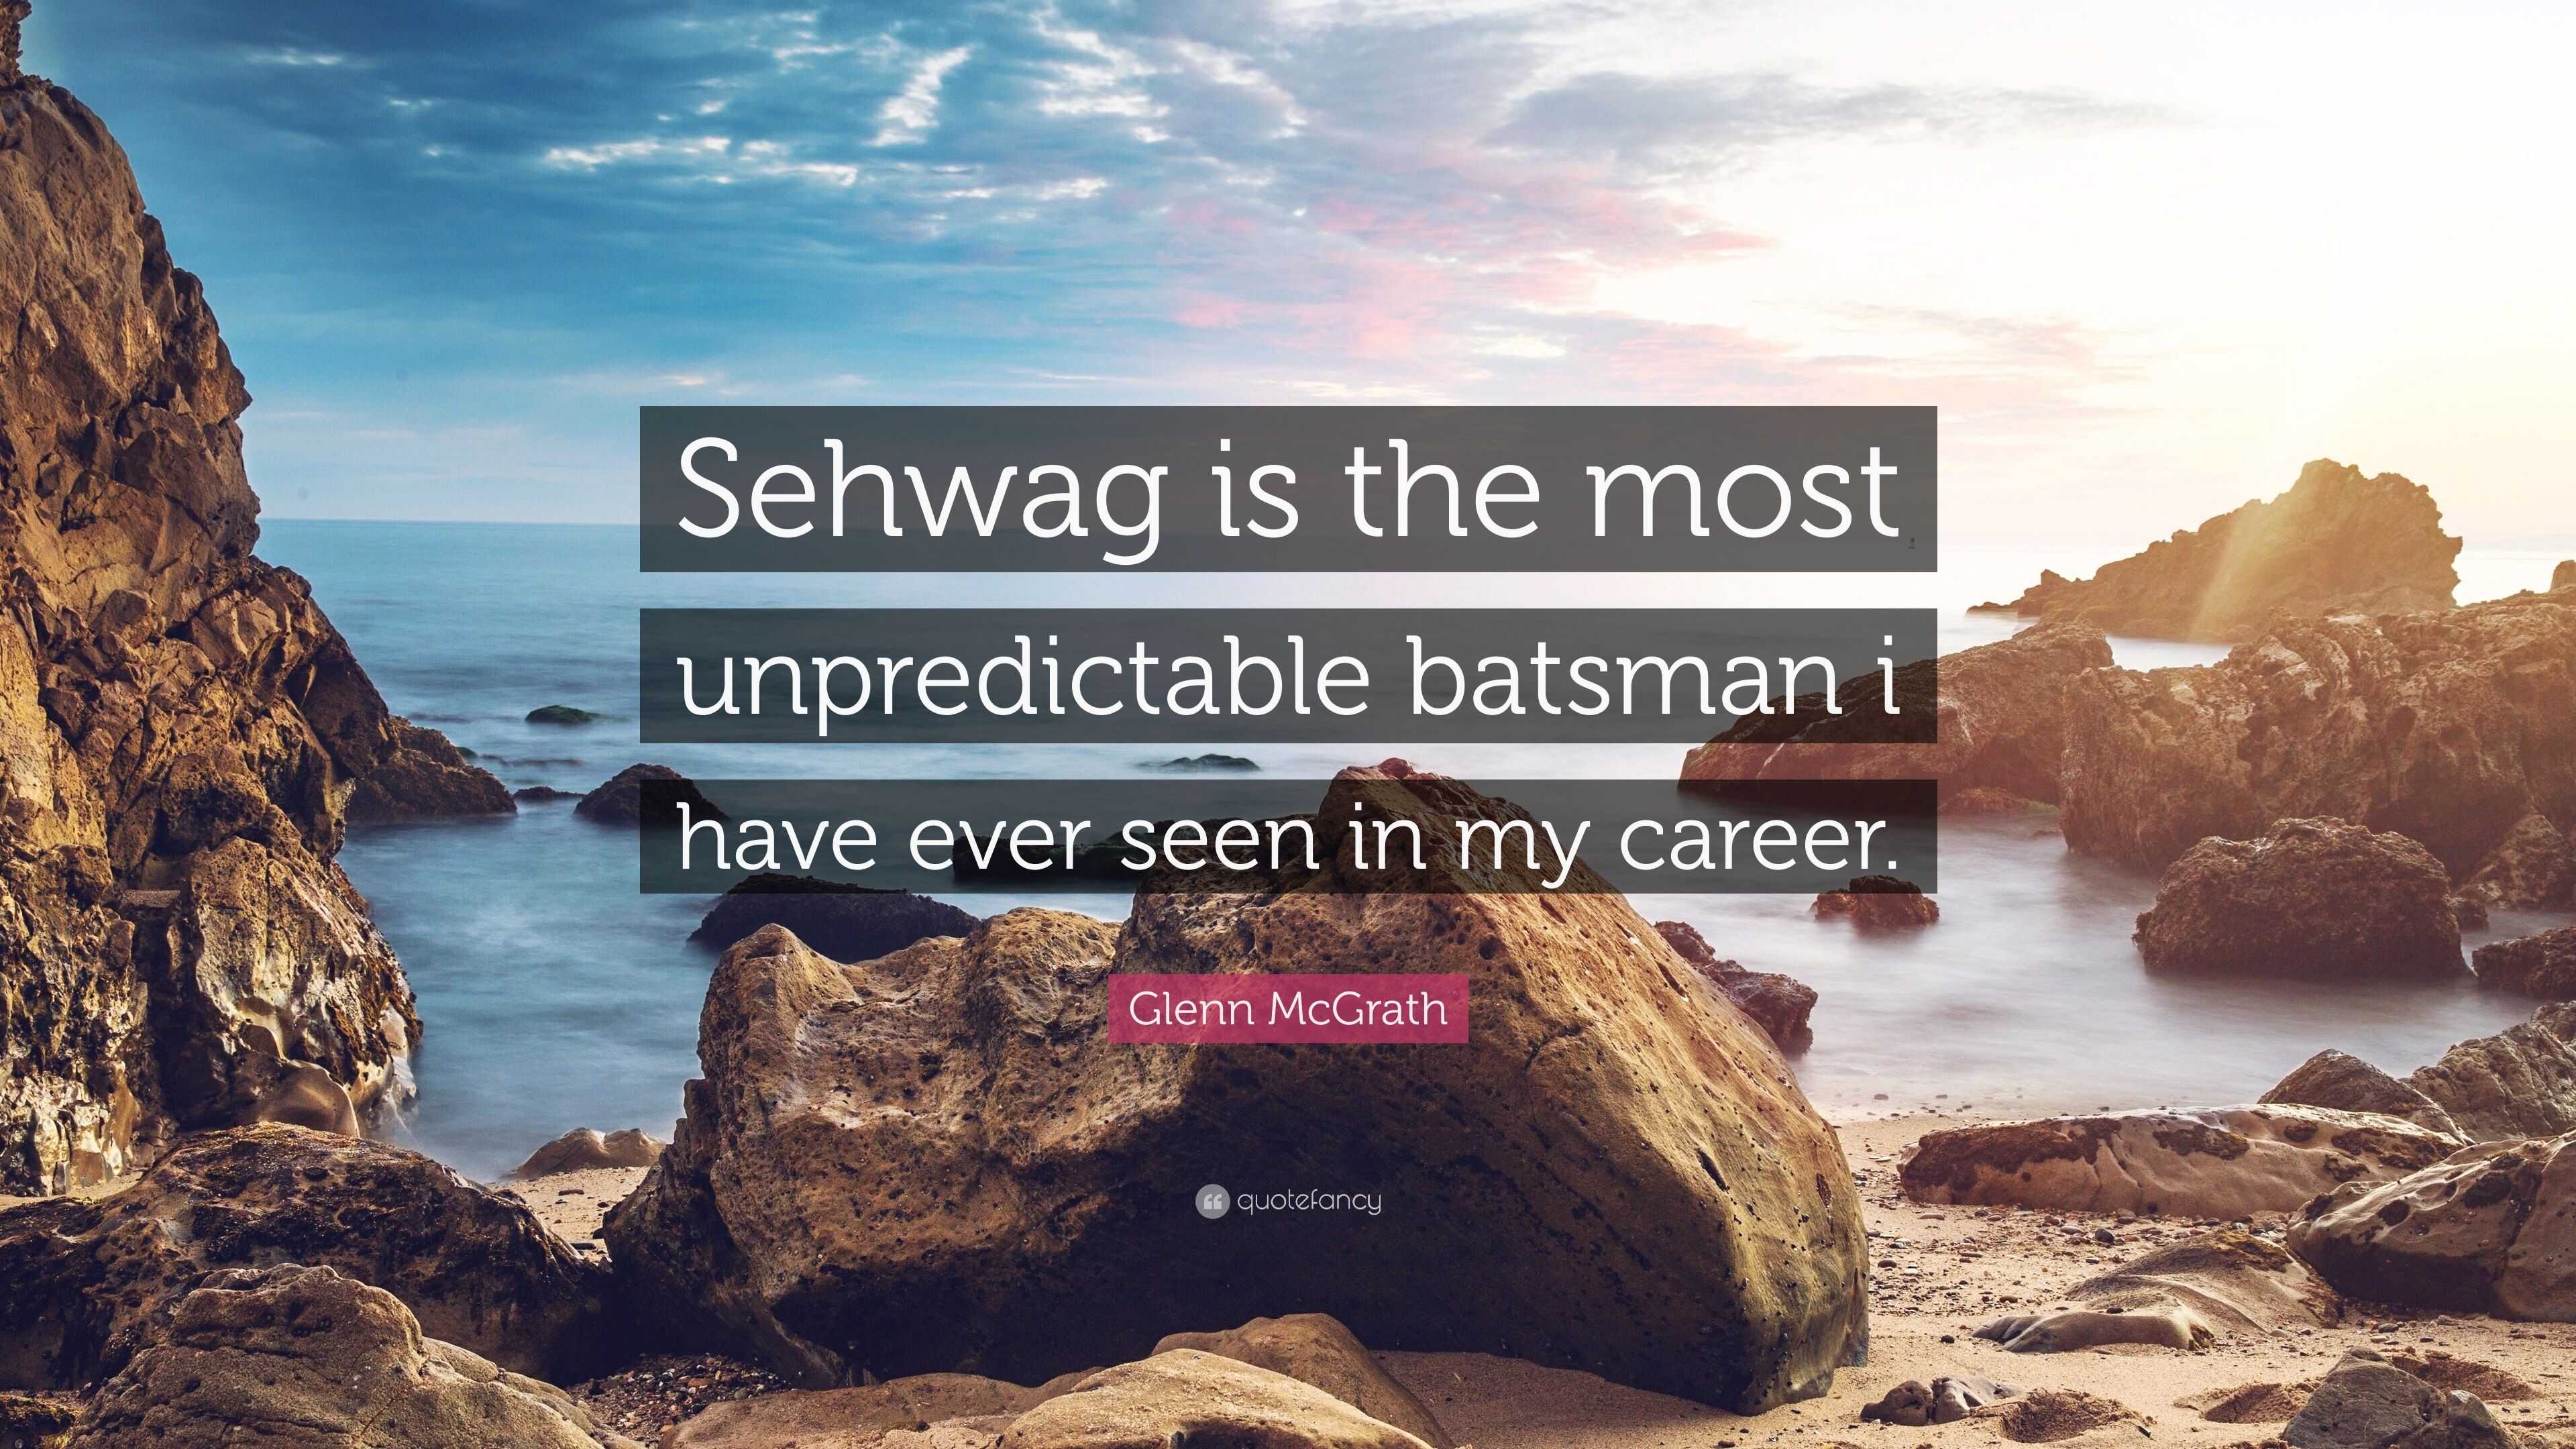 Glenn McGrath Quote: “Sehwag is the most unpredictable batsman i have ever  seen in my career.”